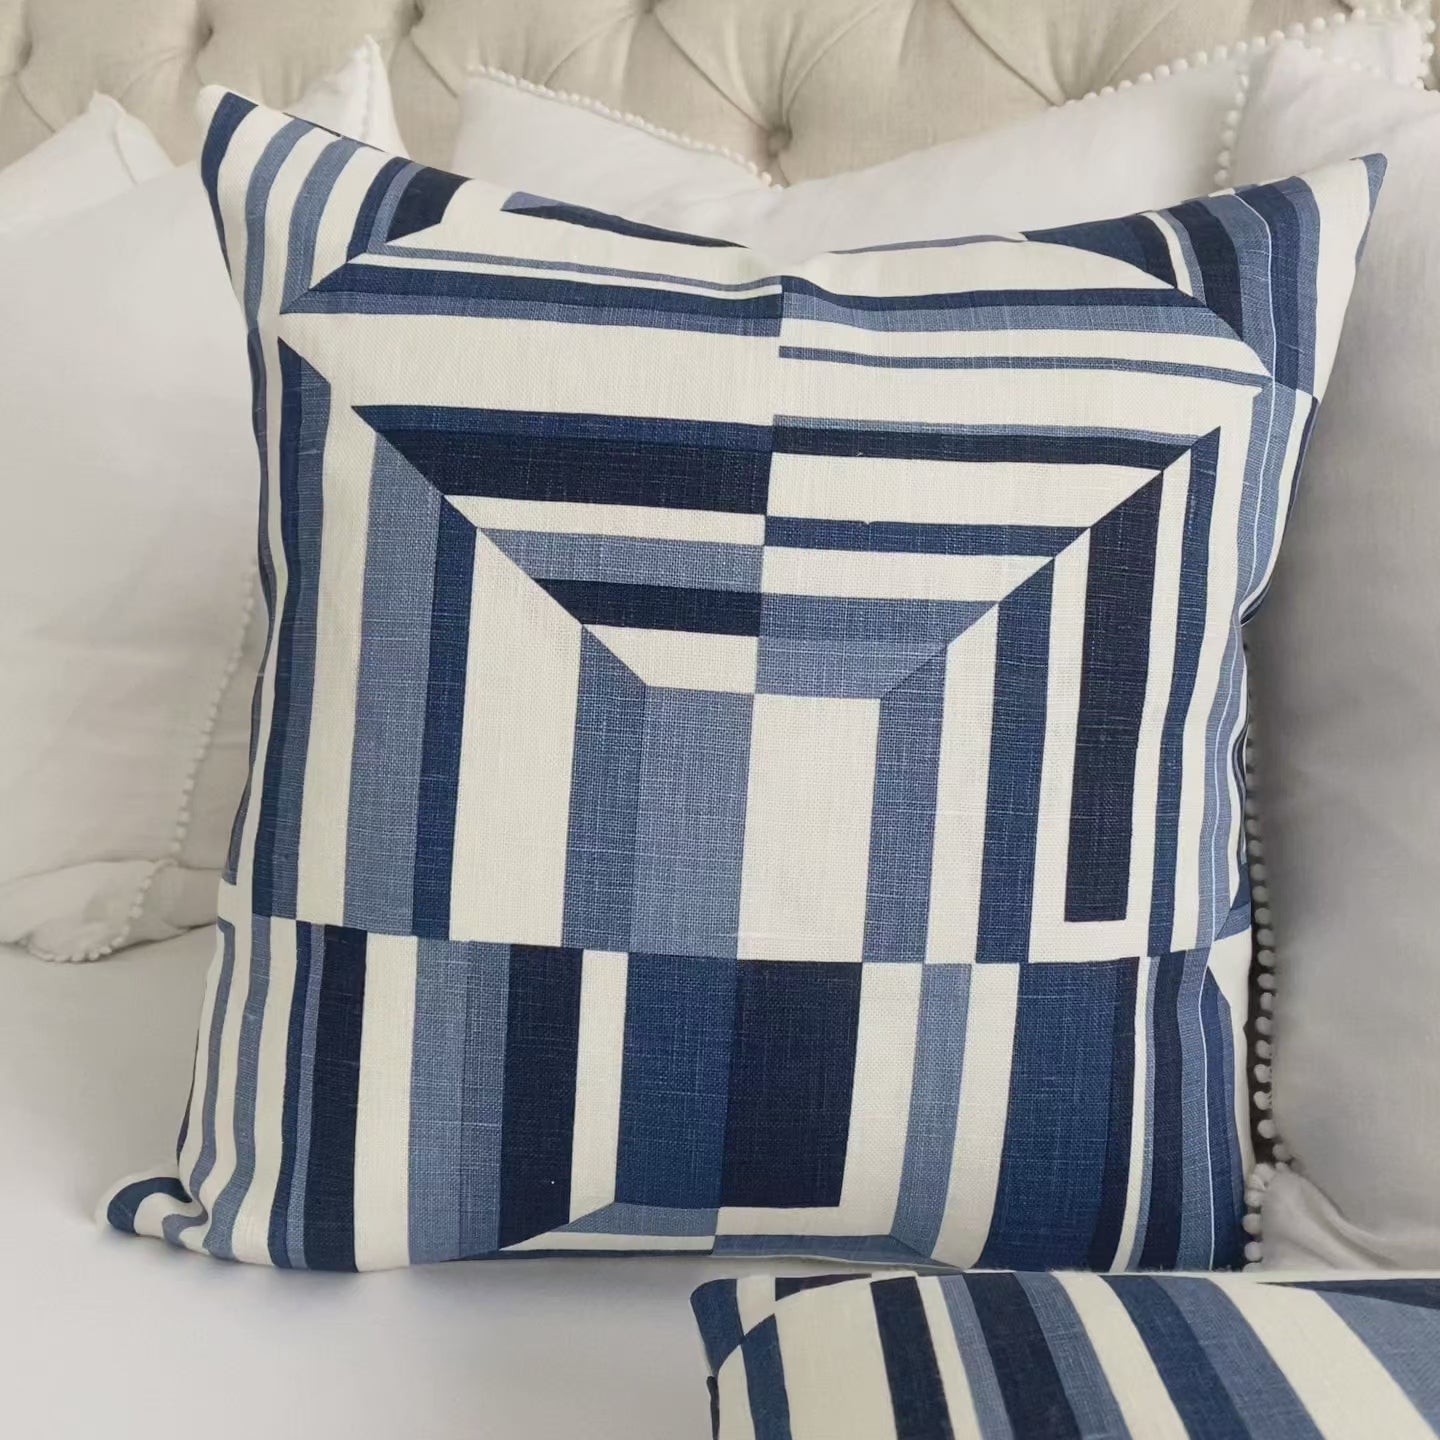 Thibaut Cubism Geometric Blue and White Stripes Linen Designer Luxury Decorative Throw Pillow Cover Product Video